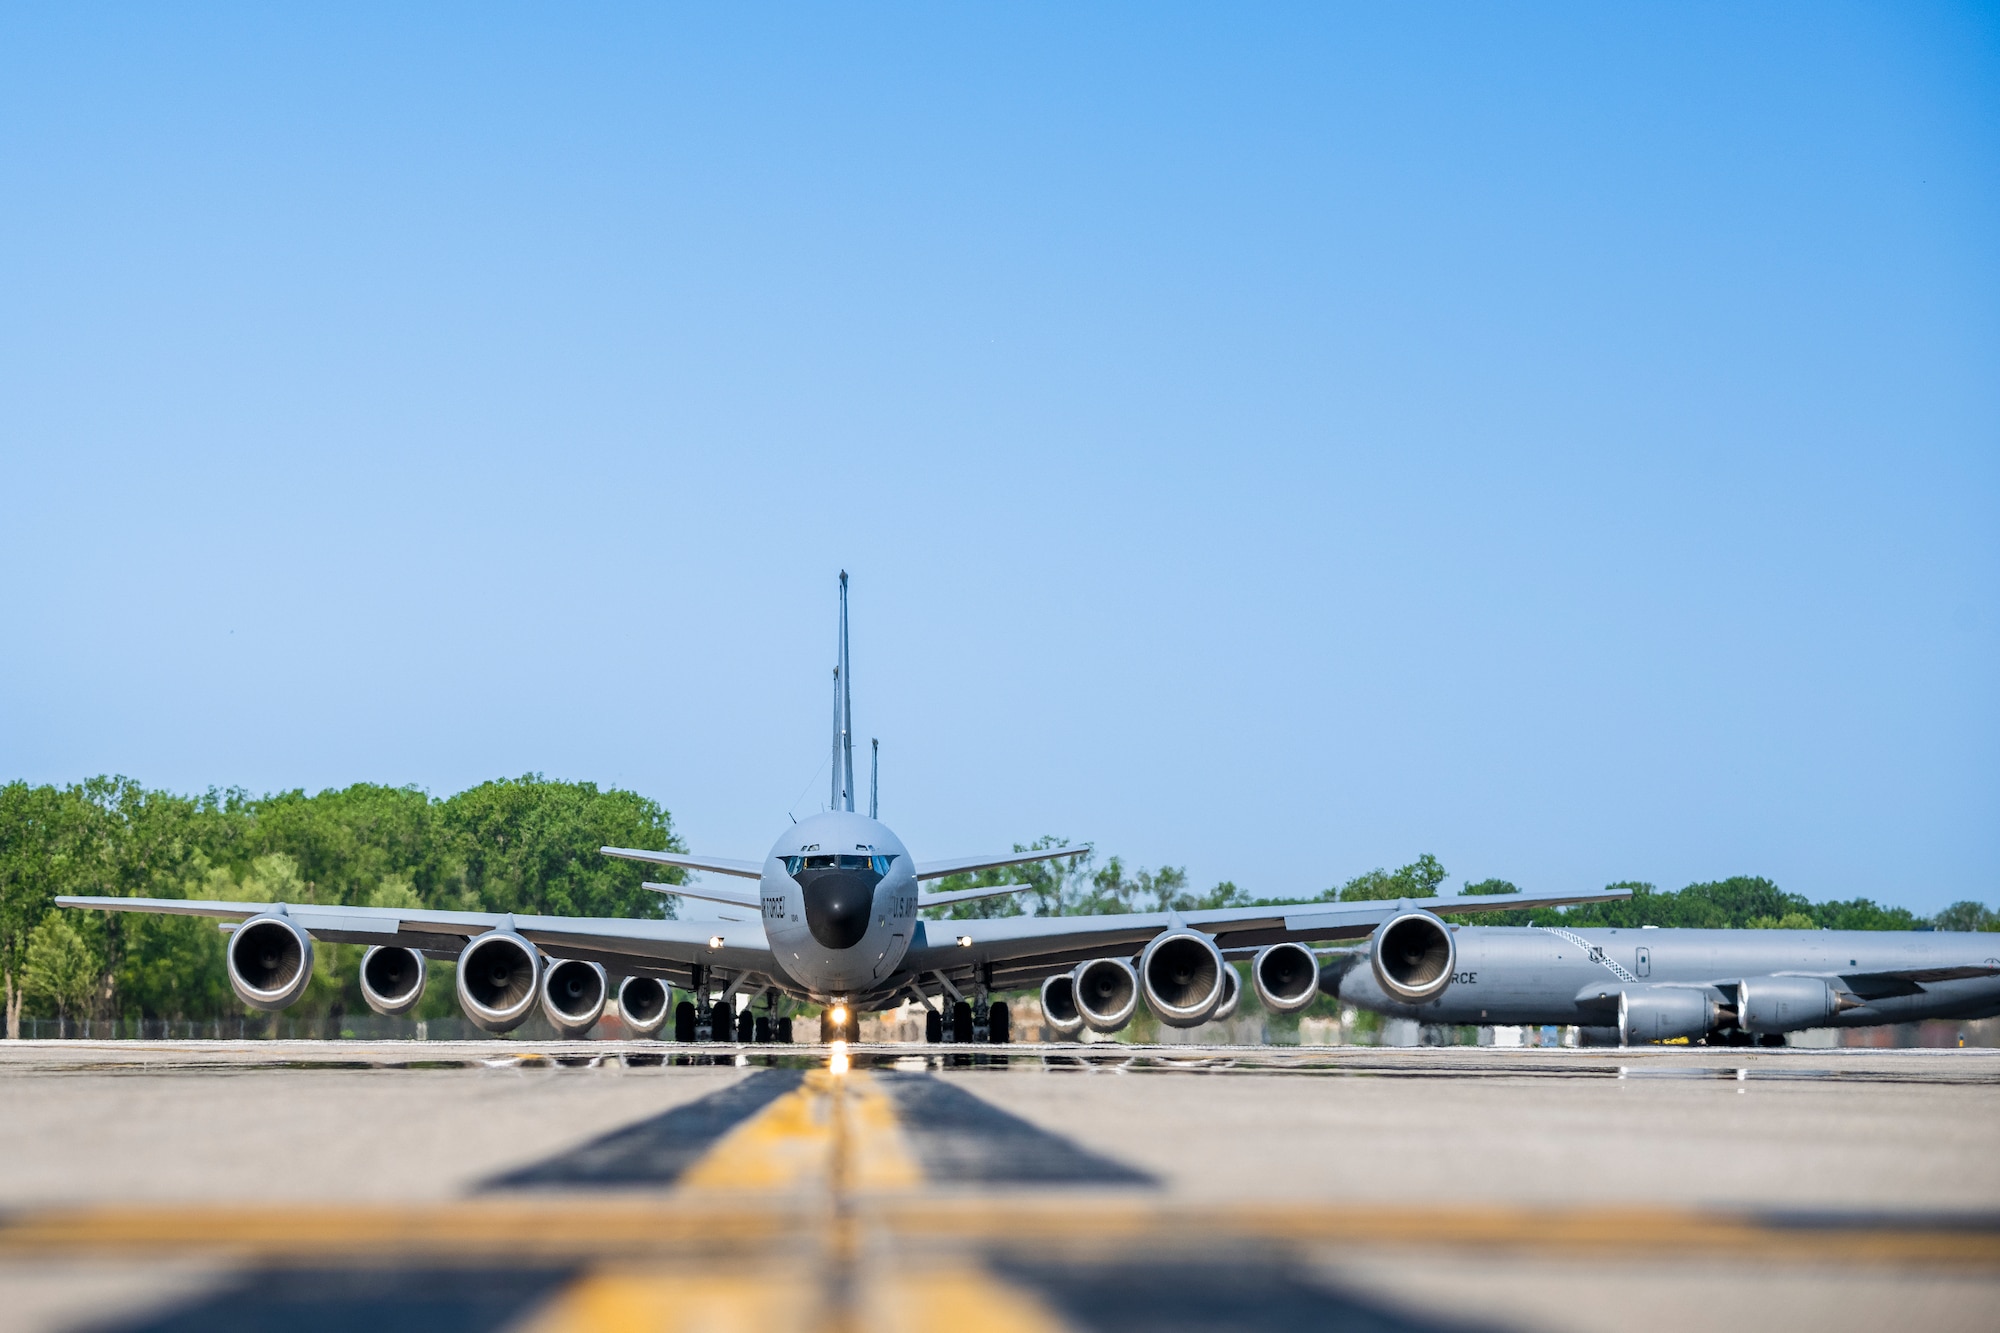 Line of KC135 aircraft on runway.